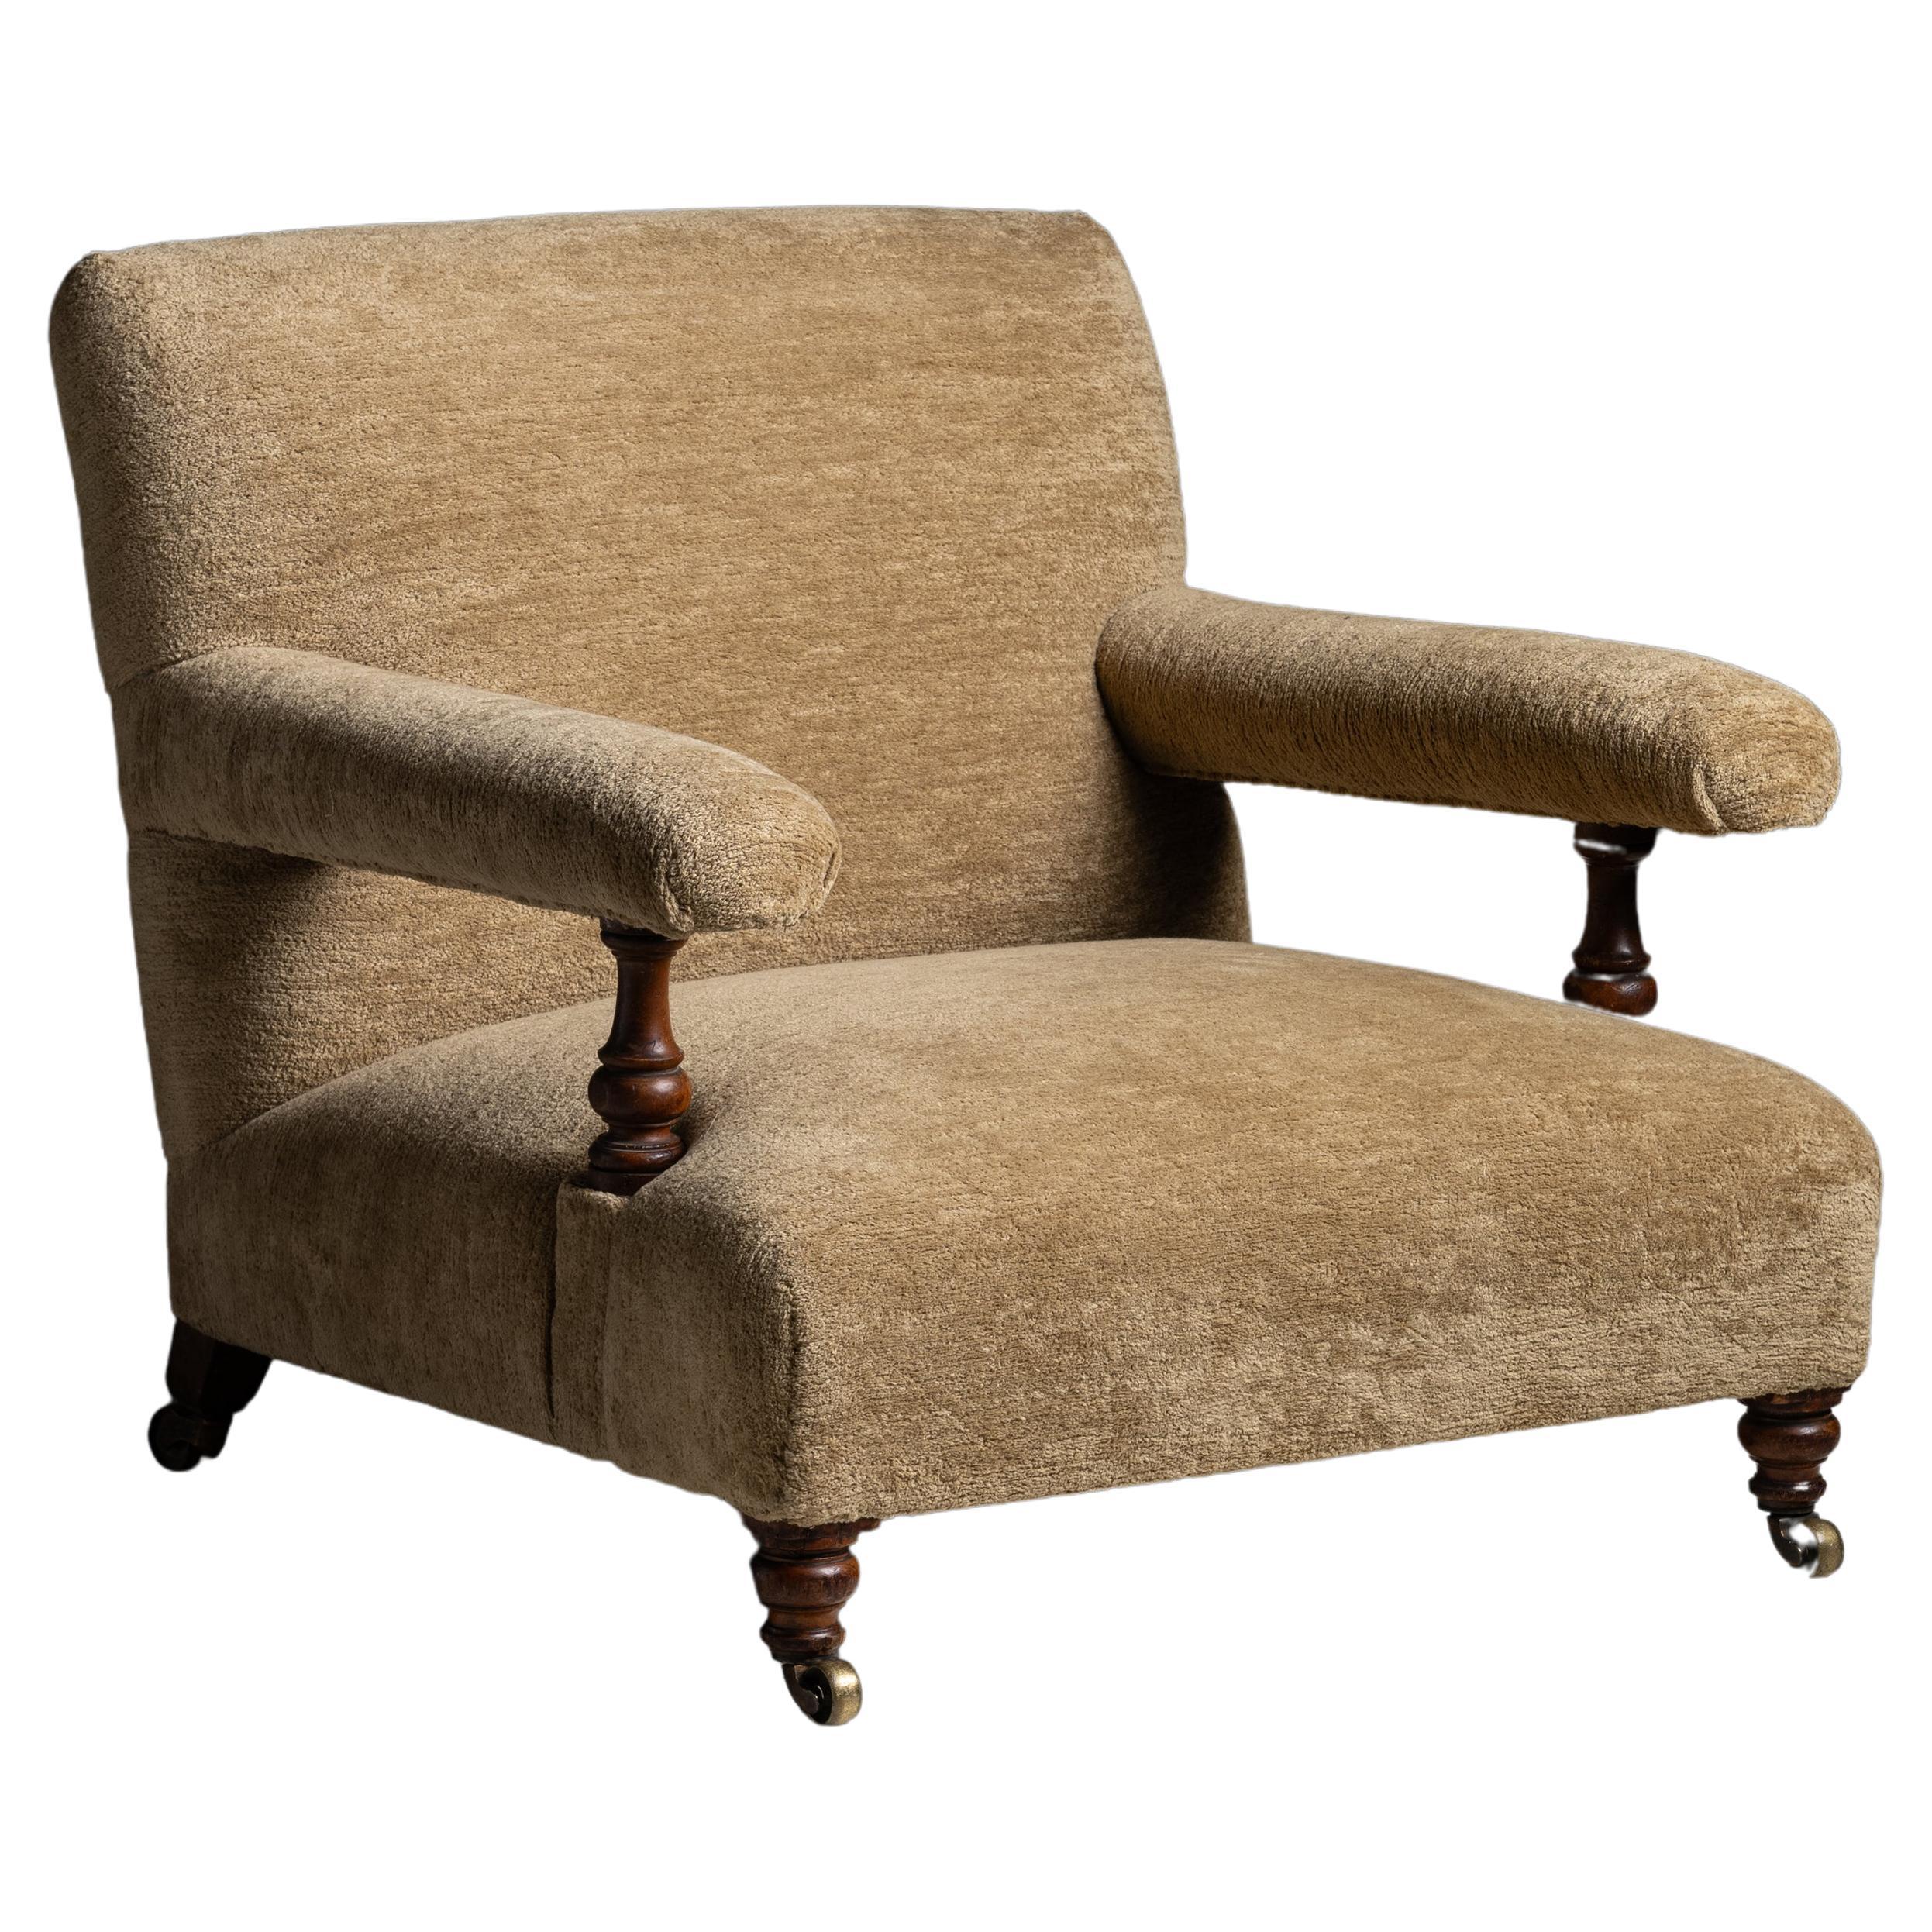 Howard & Sons Open Armchair in Chenille by Pierre Frey, England circa 1850